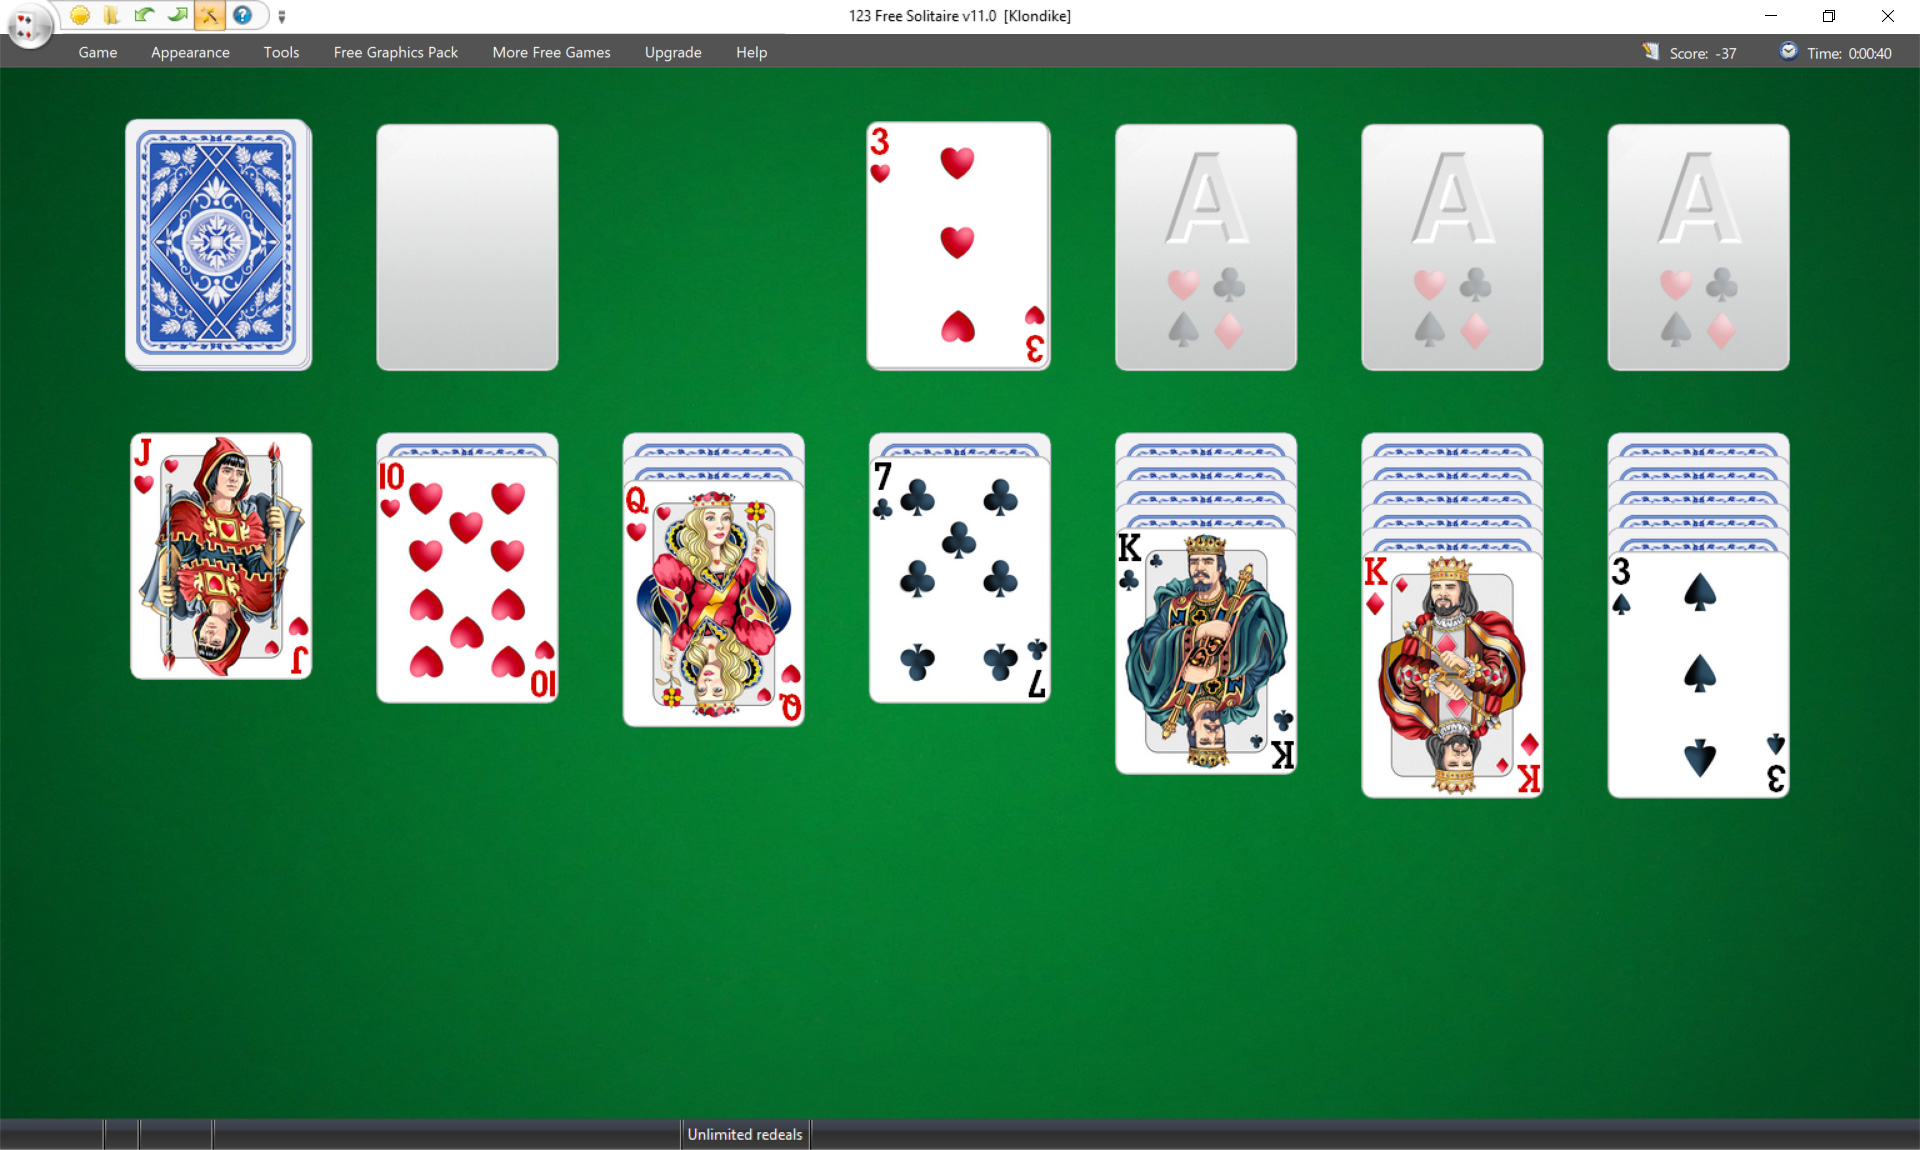 123 Free Solitaire - new improved display